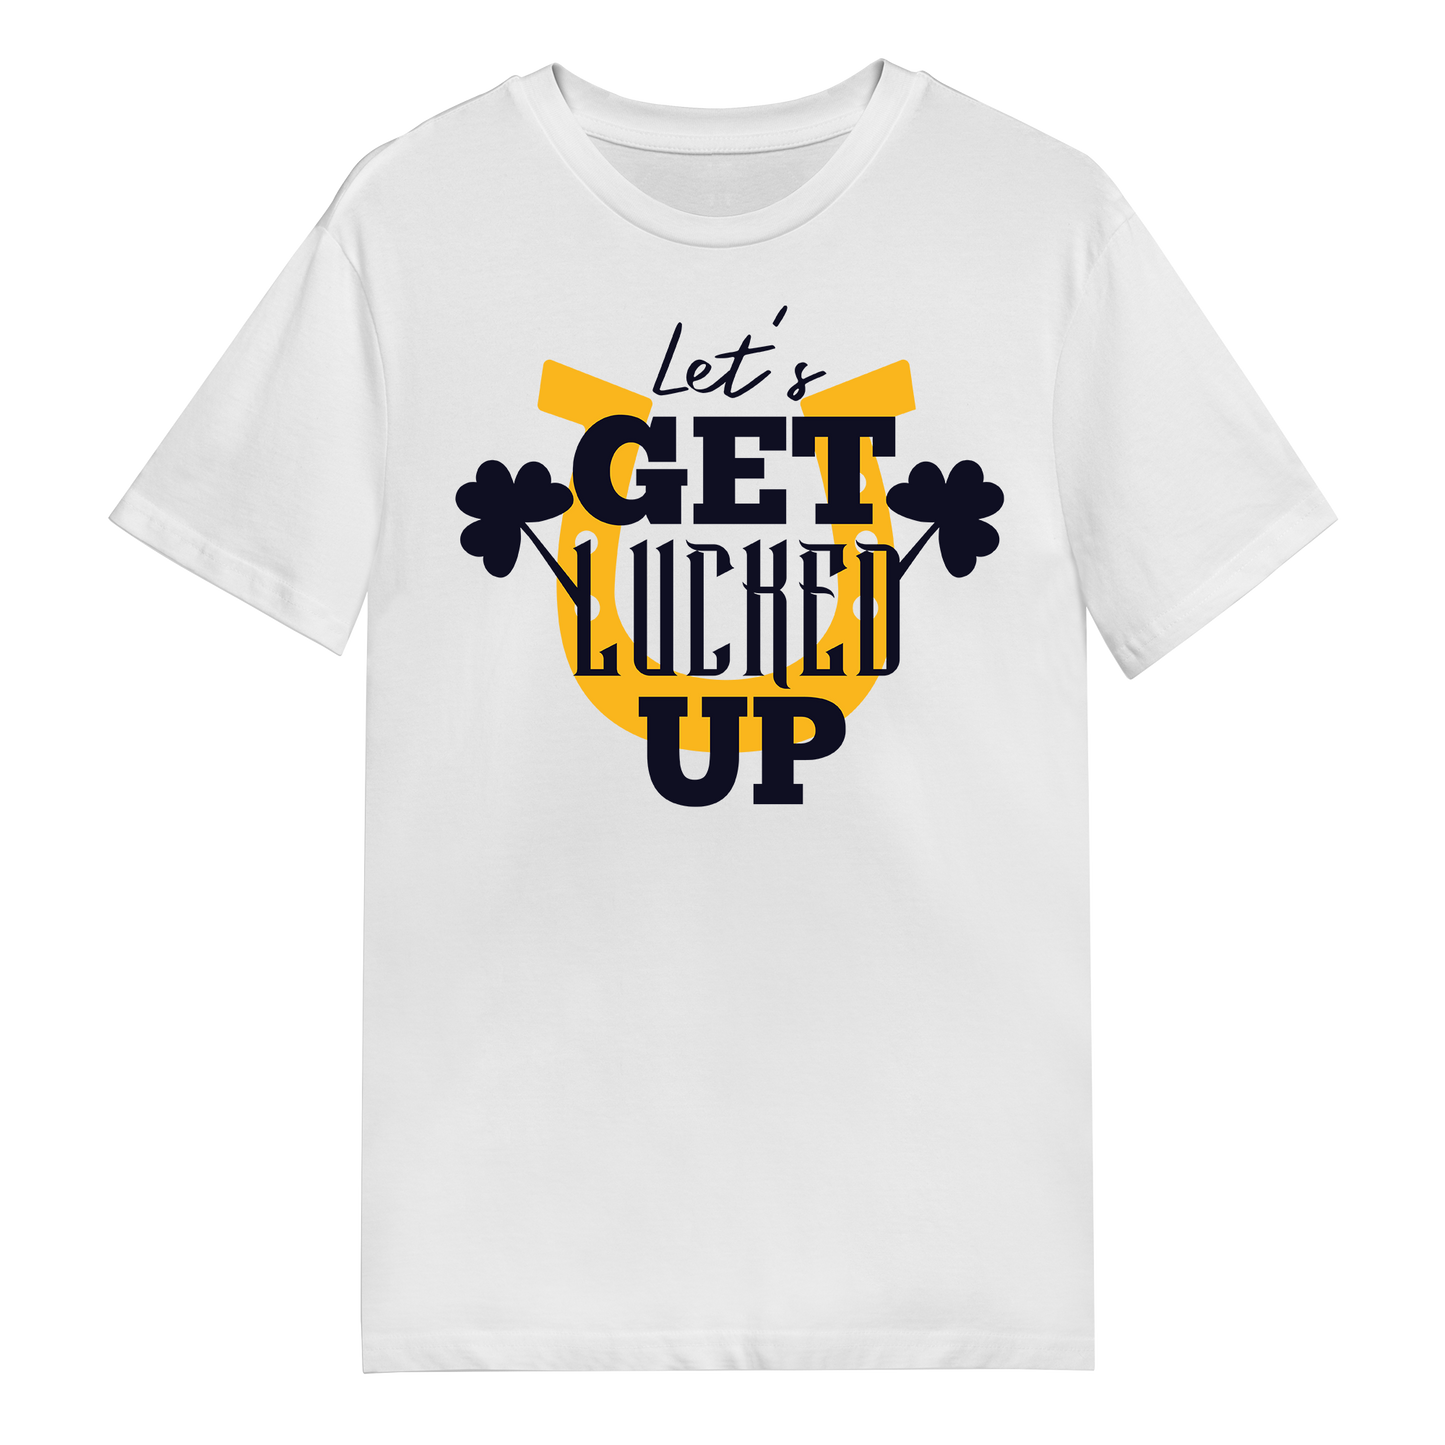 Men's T-Shirt – Let’s Get Lucked Up